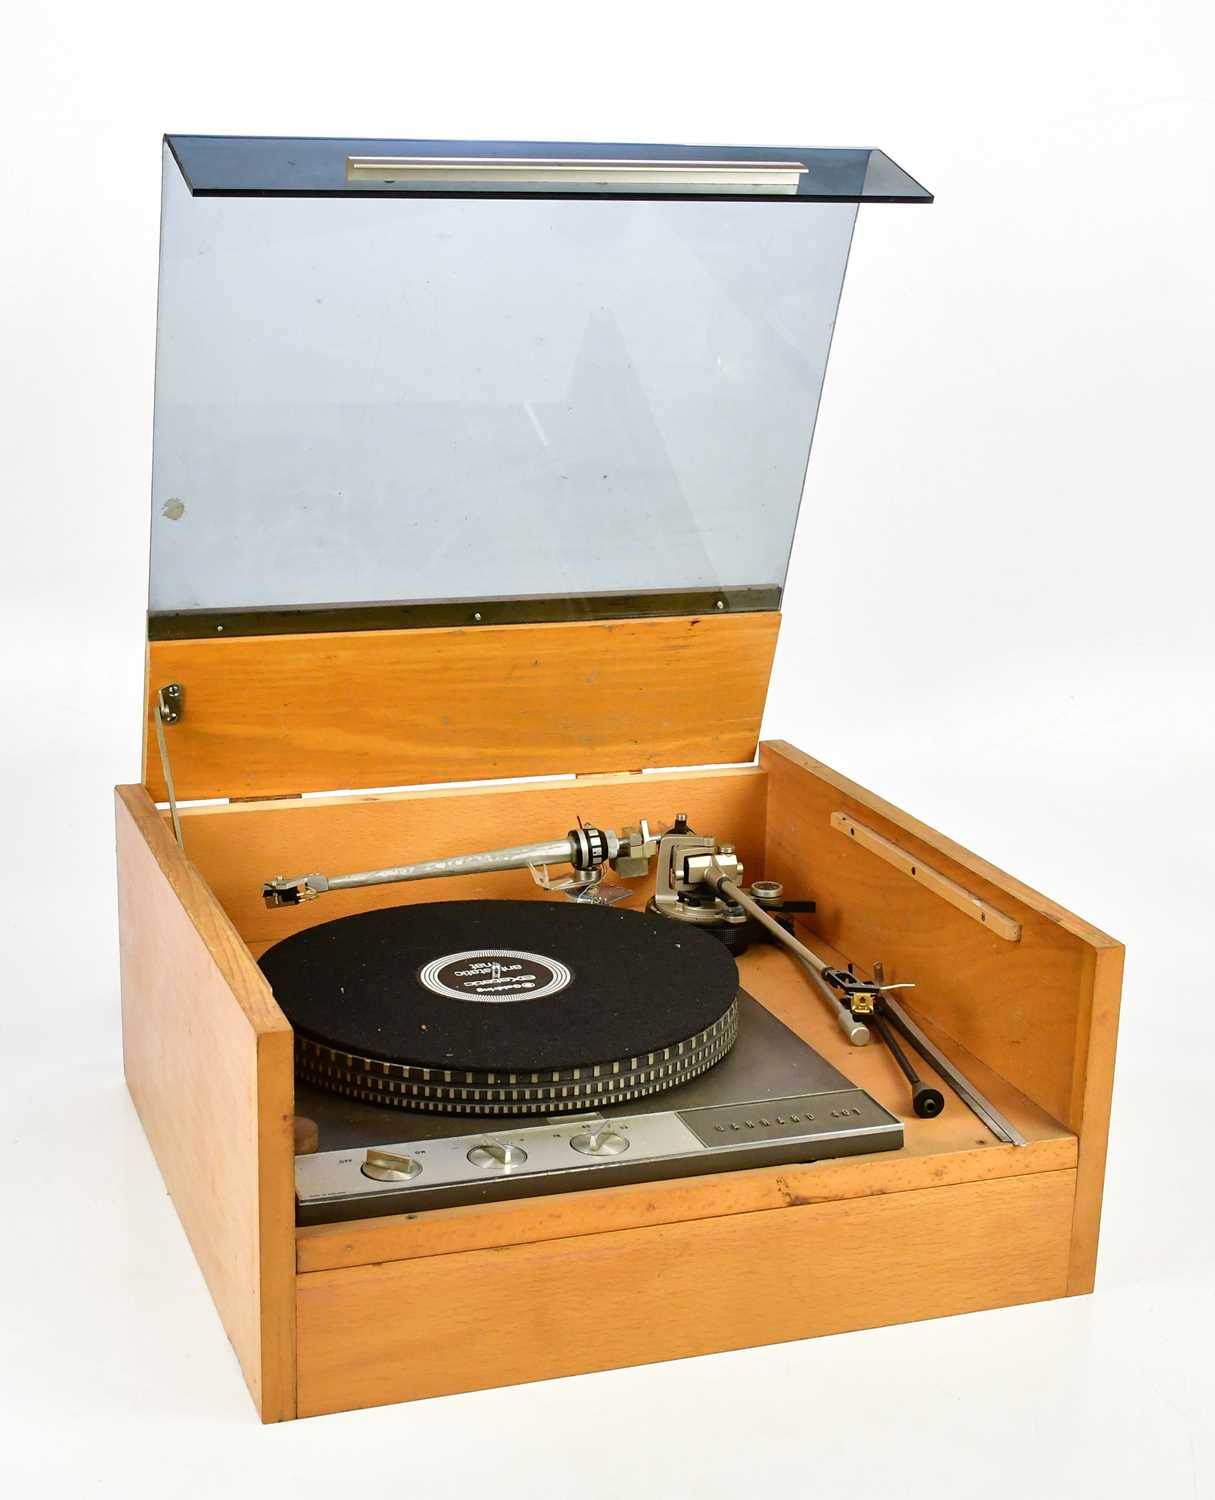 GARRARD; a 401 turntable, with a EPA-A501H arm, and a miscellaneous arm also in case. Condition